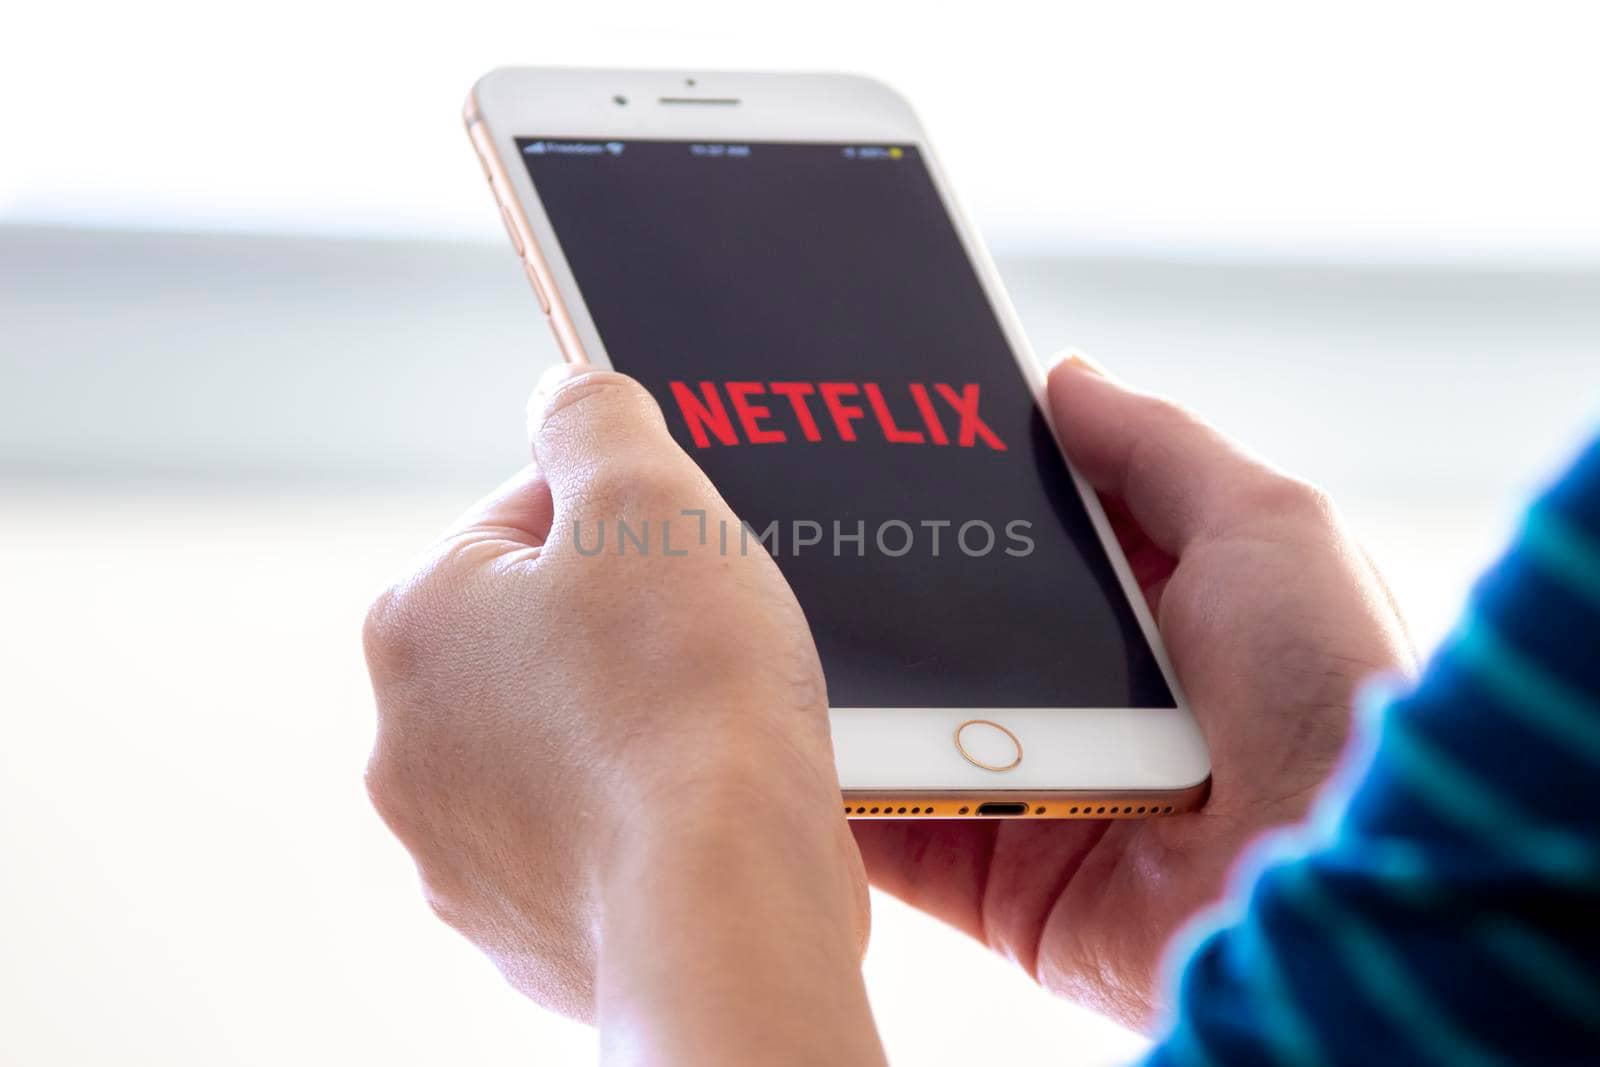 Calgary, Alberta. Canada Nov 28 2019: Woman holds an iphone plus with the Netflix app on her hands. Netflix release a new update of its online video streaming service.Illustrative by oasisamuel